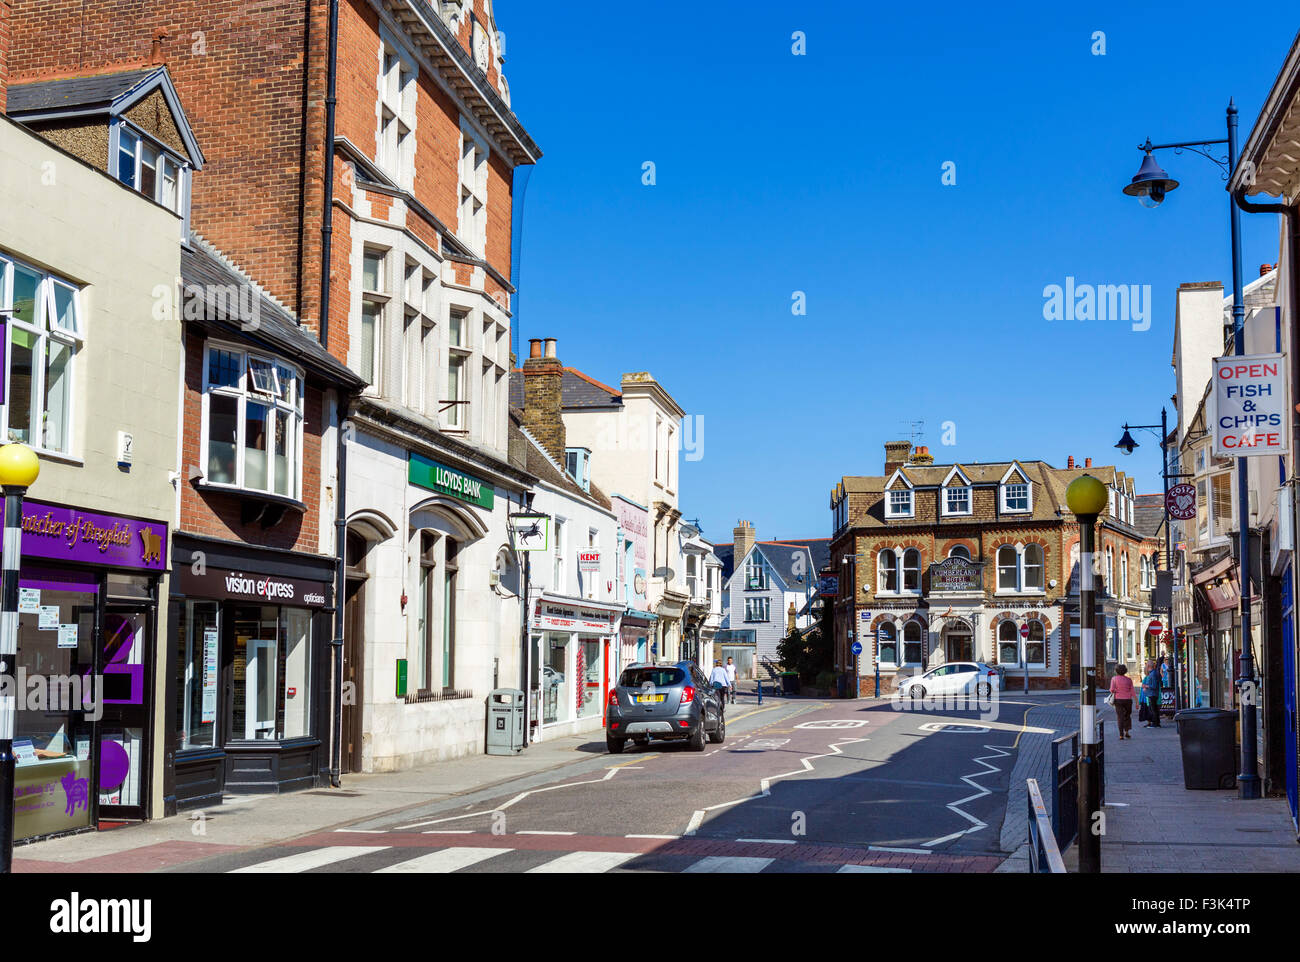 Shops on the High Street in the town centre, Whitstable, Kent, England, UK Stock Photo